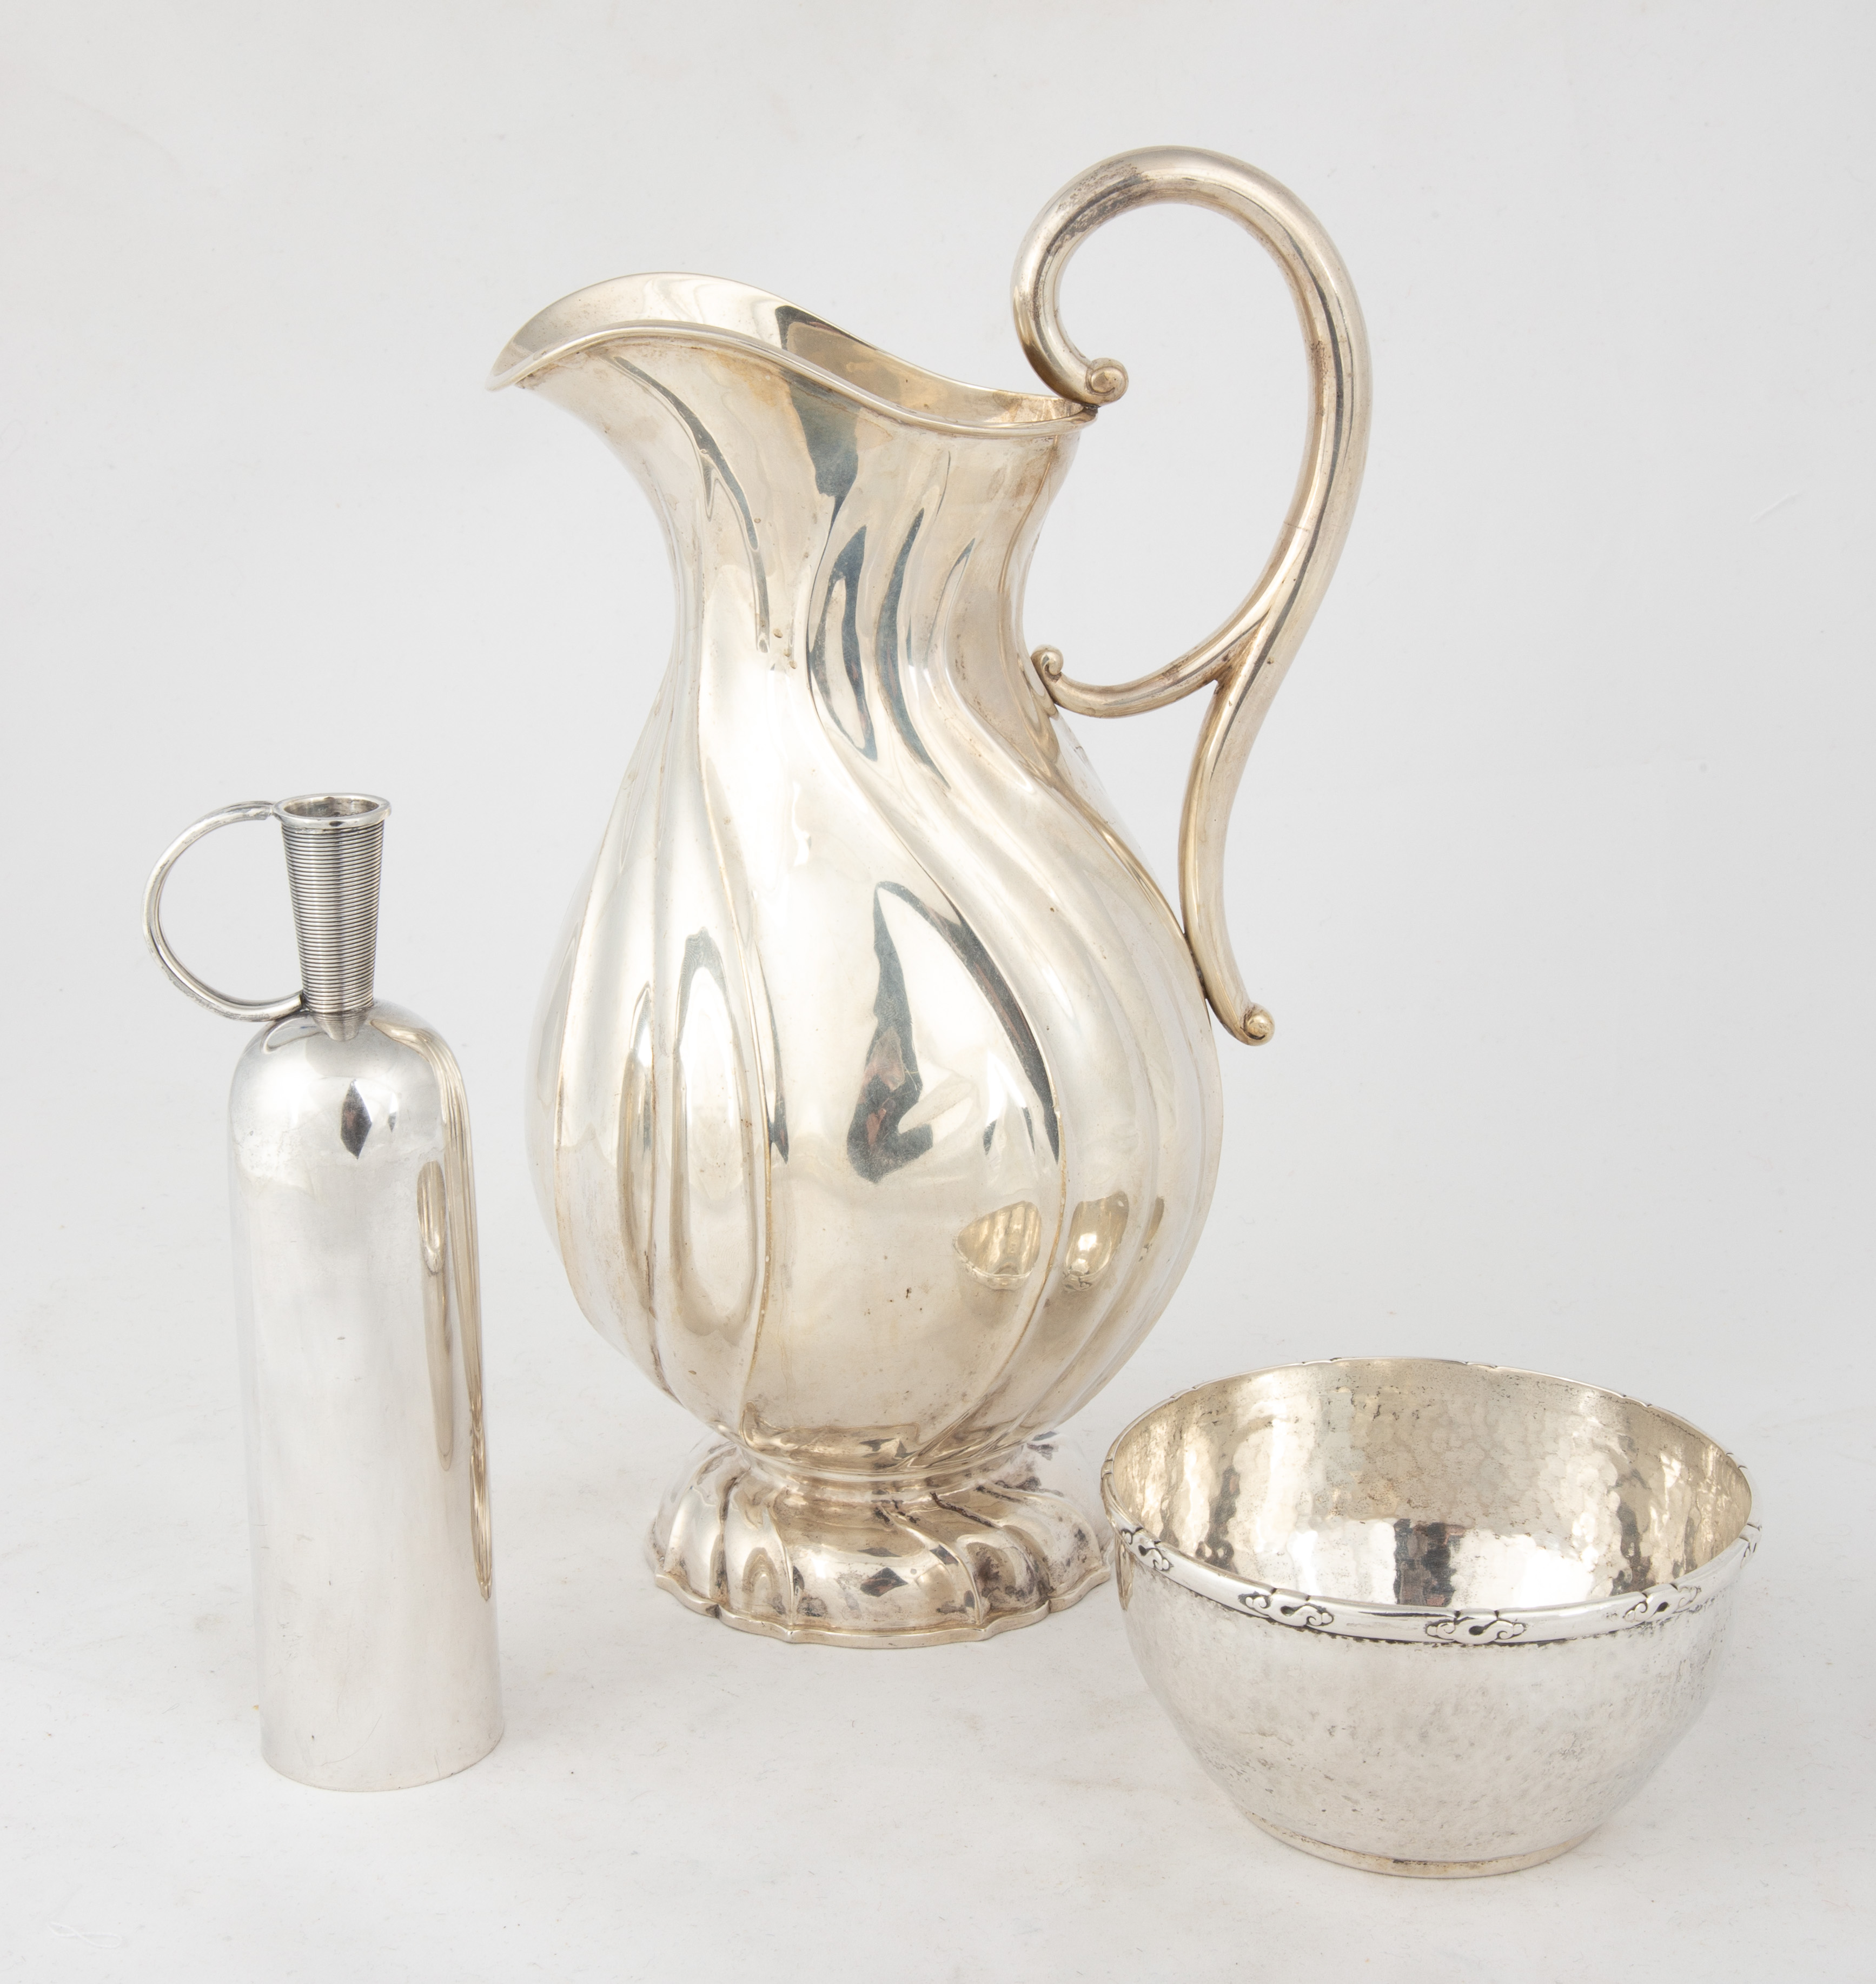 VARIOUS DANISH SILVER ITEMS Including